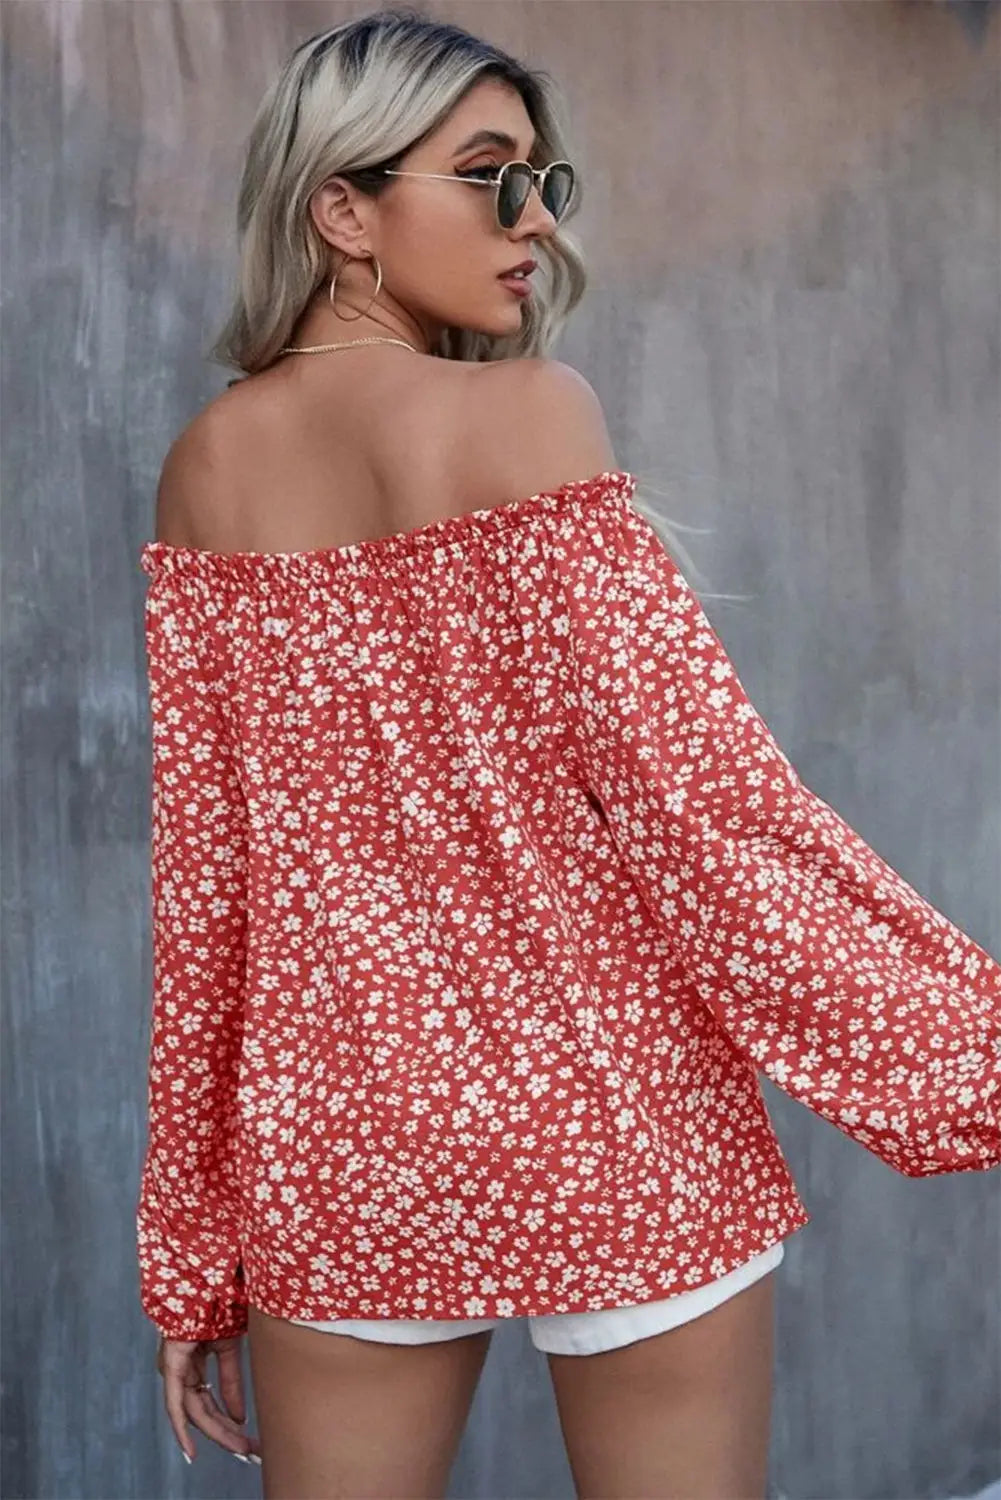 Fiery red floral print frill trim off-shoulder lantern sleeve blouse - blouses & shirts